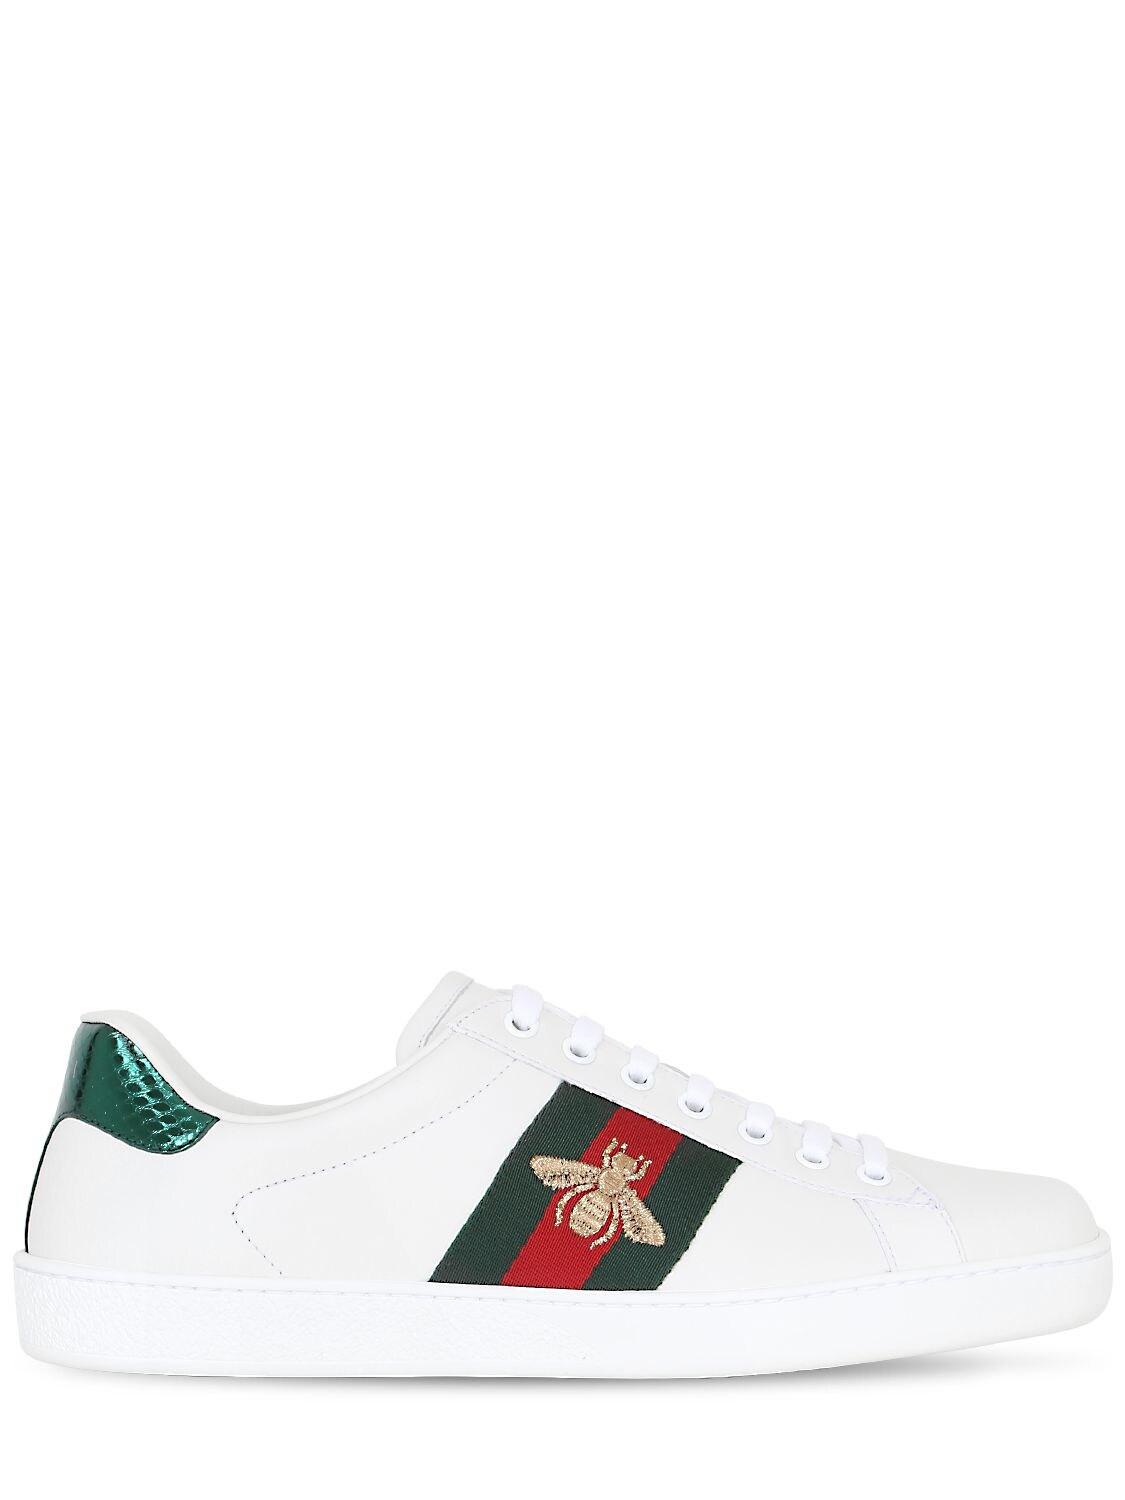 Gucci Ace Embroidered Tiger Leather Sneaker in White for Men - Save 45% -